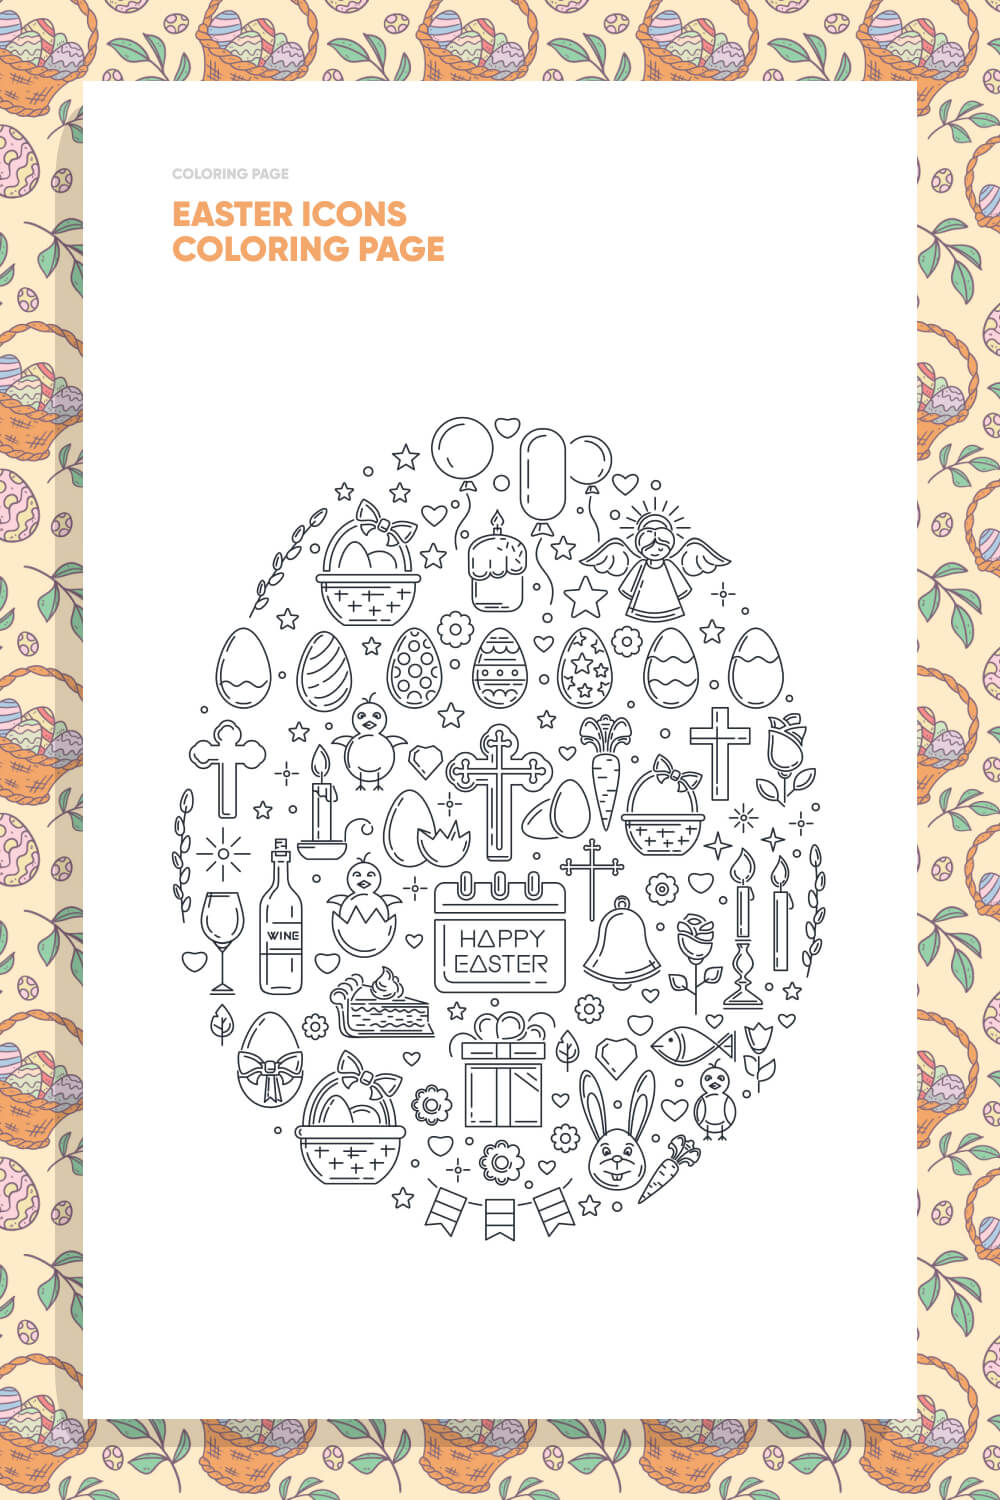 Easter Icons Coloring Page pinteerst.